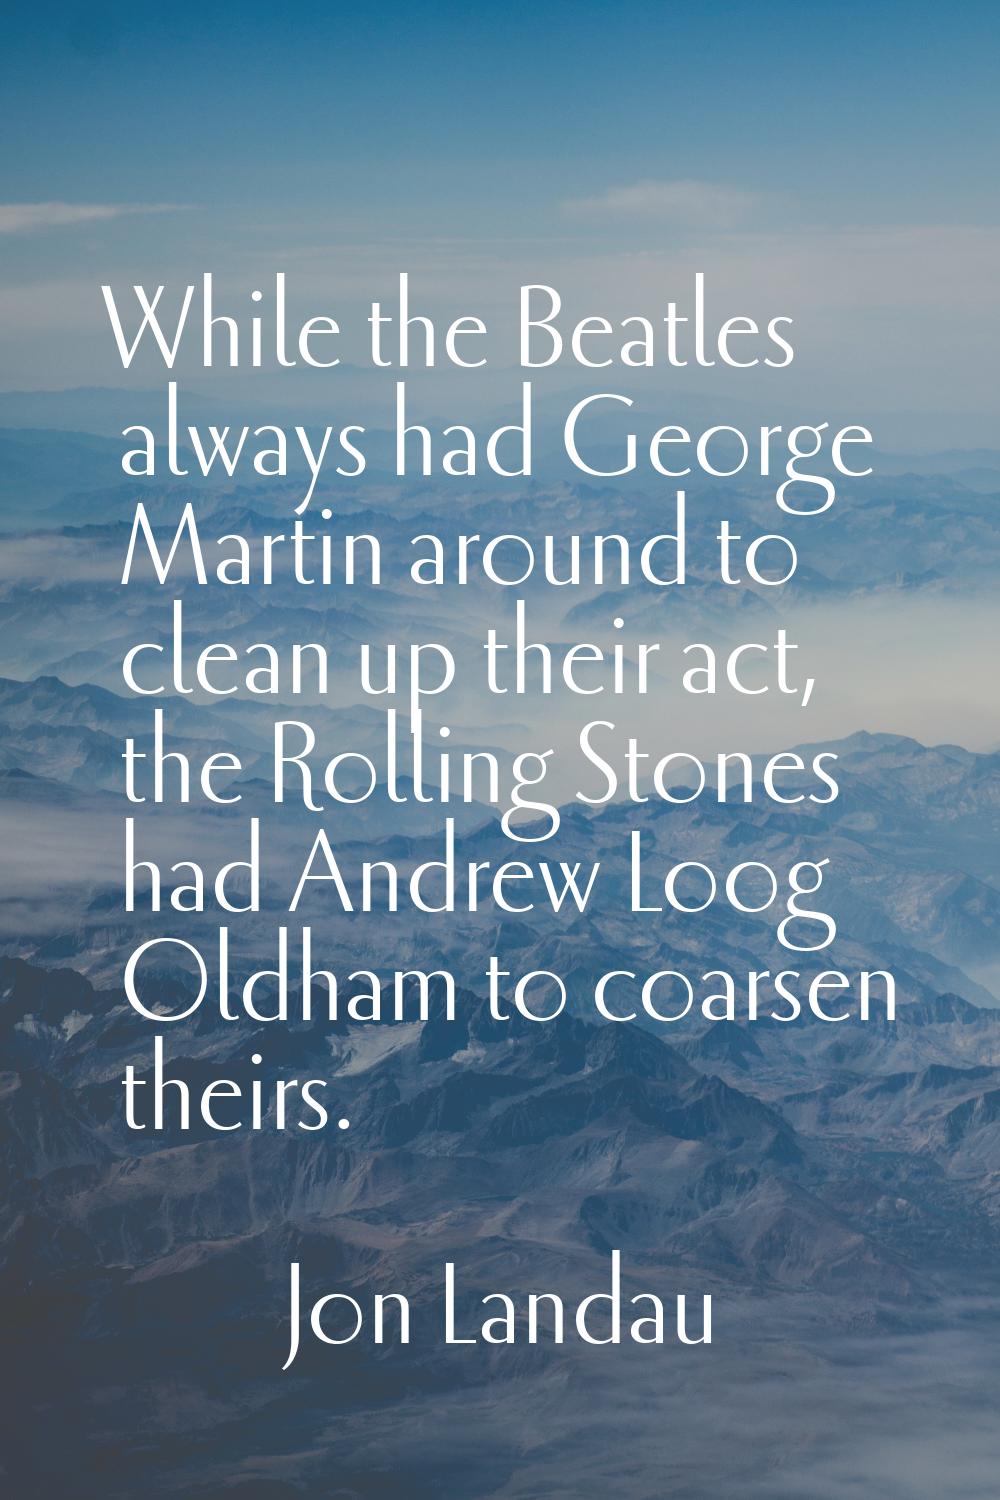 While the Beatles always had George Martin around to clean up their act, the Rolling Stones had And